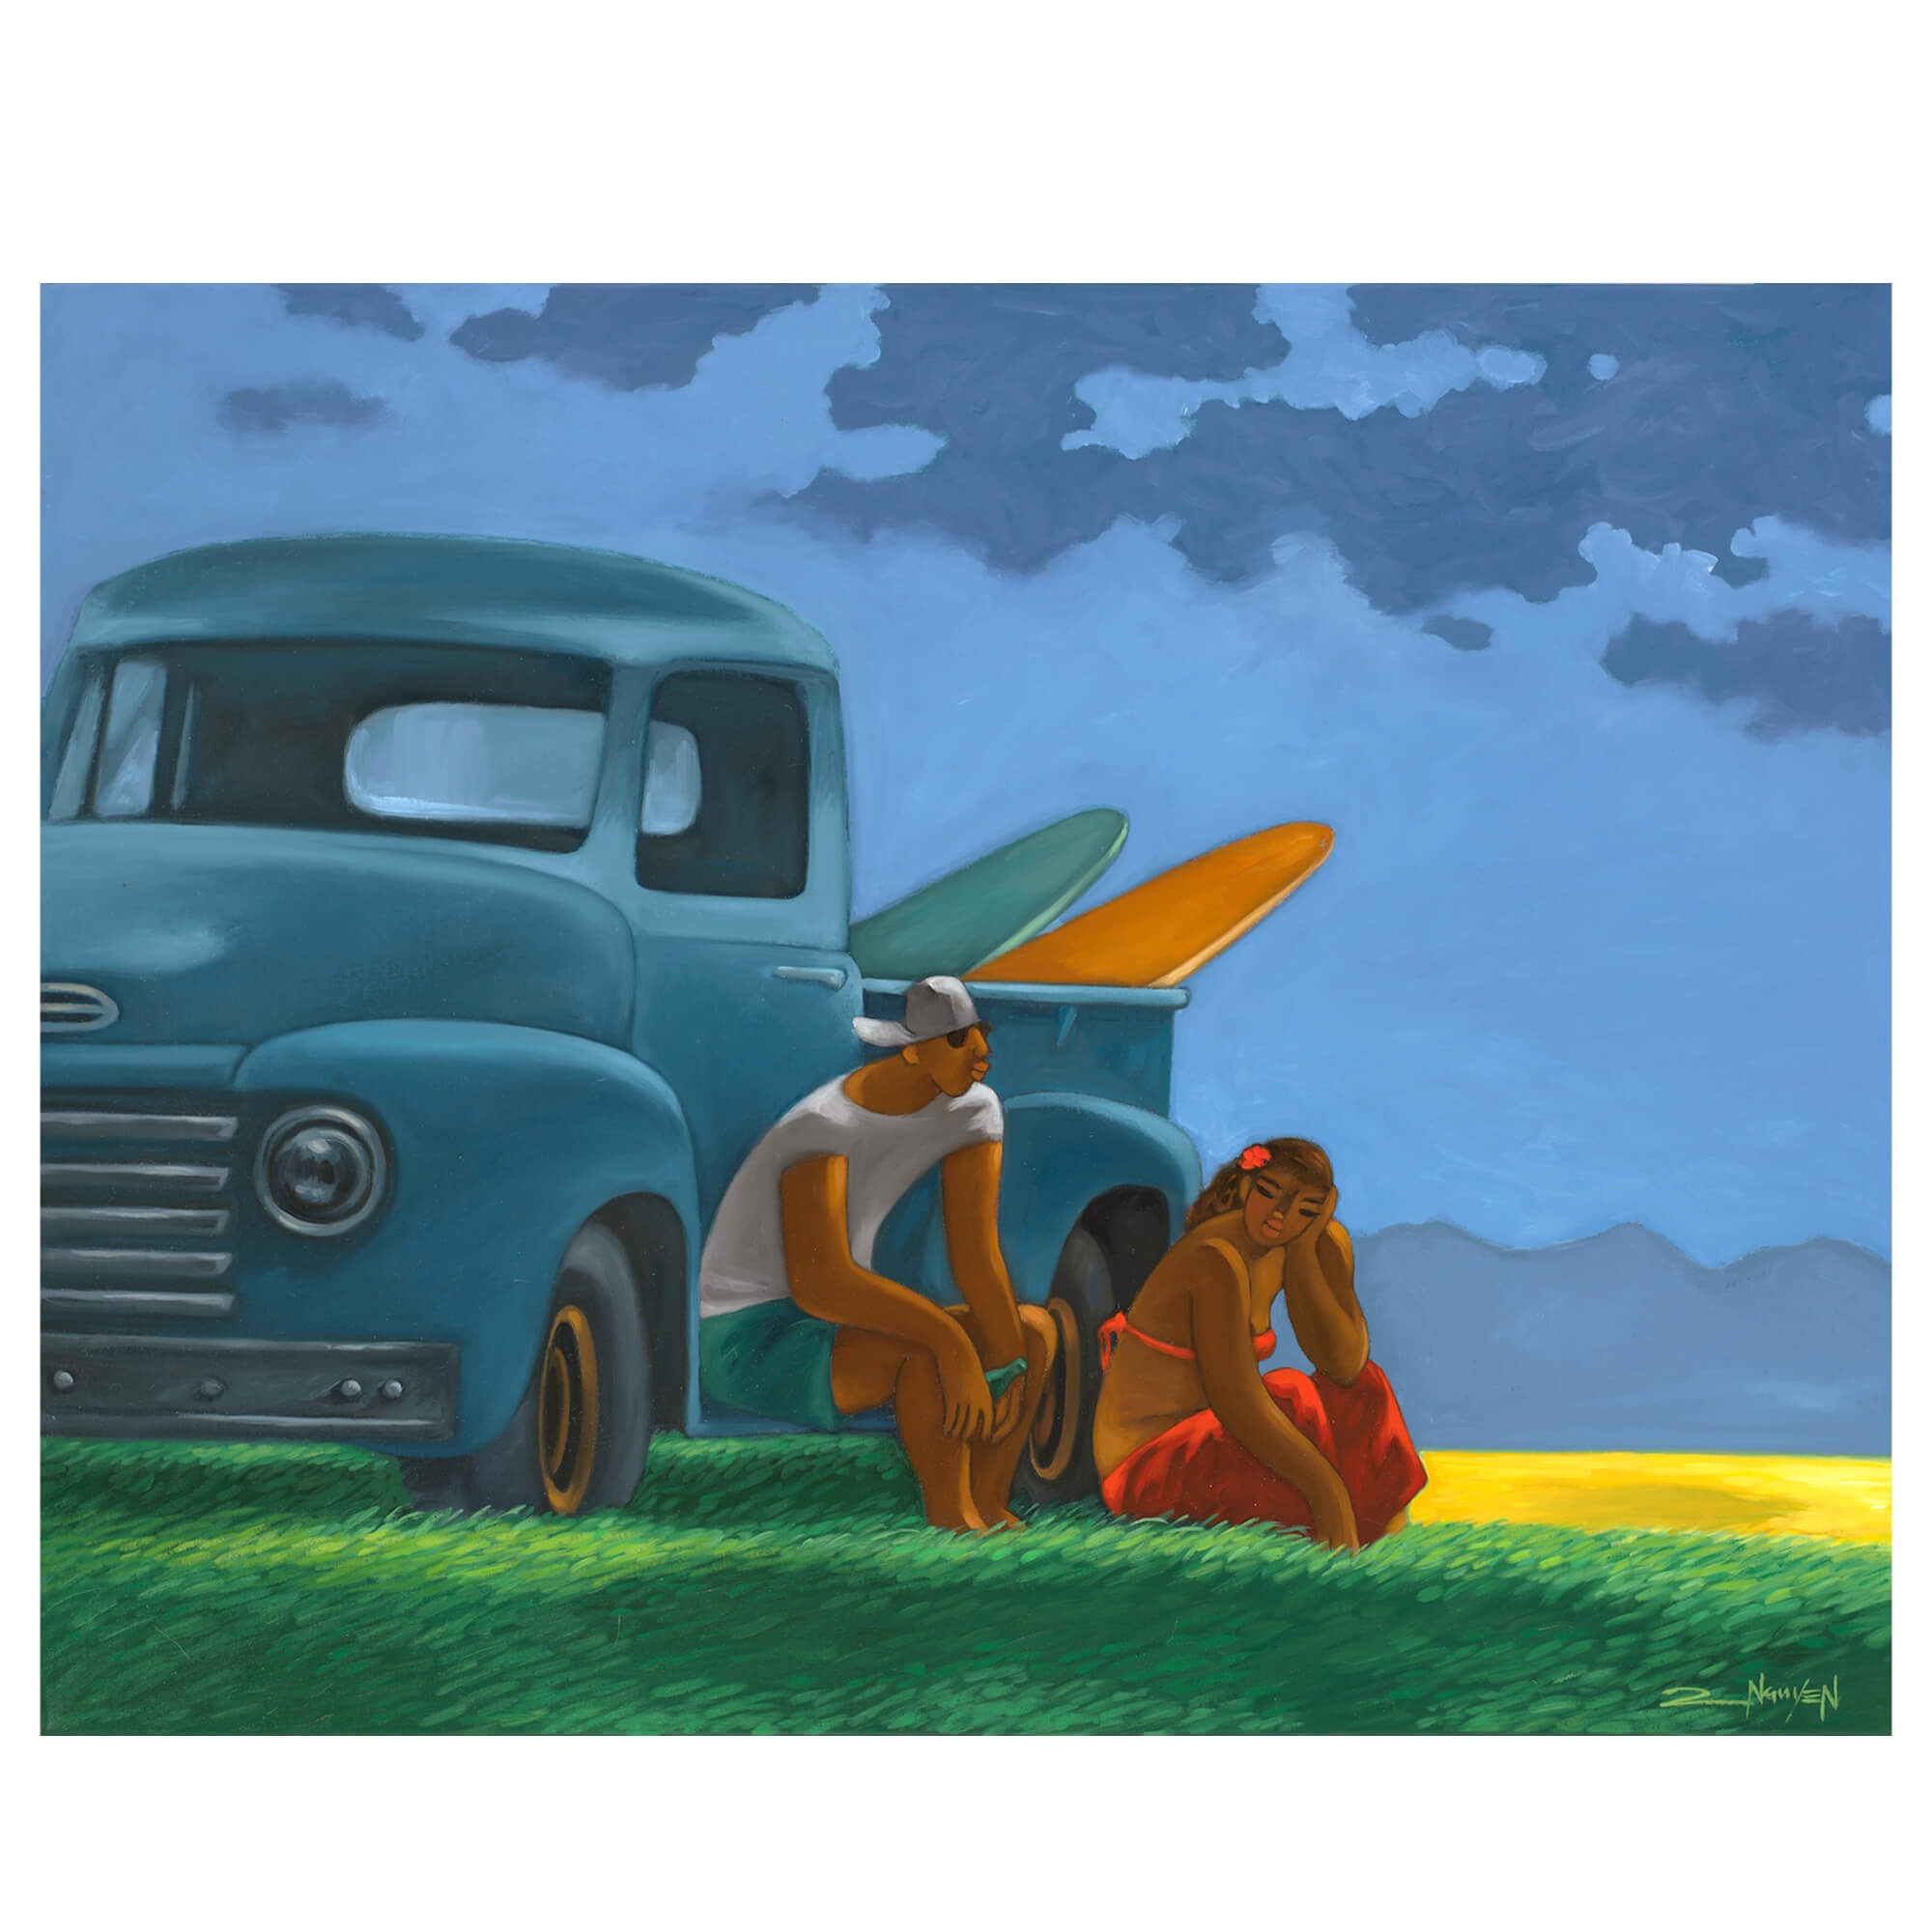 A matted art print of a couple with their surfboards and vintage truck by Hawaii artist Tim Nguyen